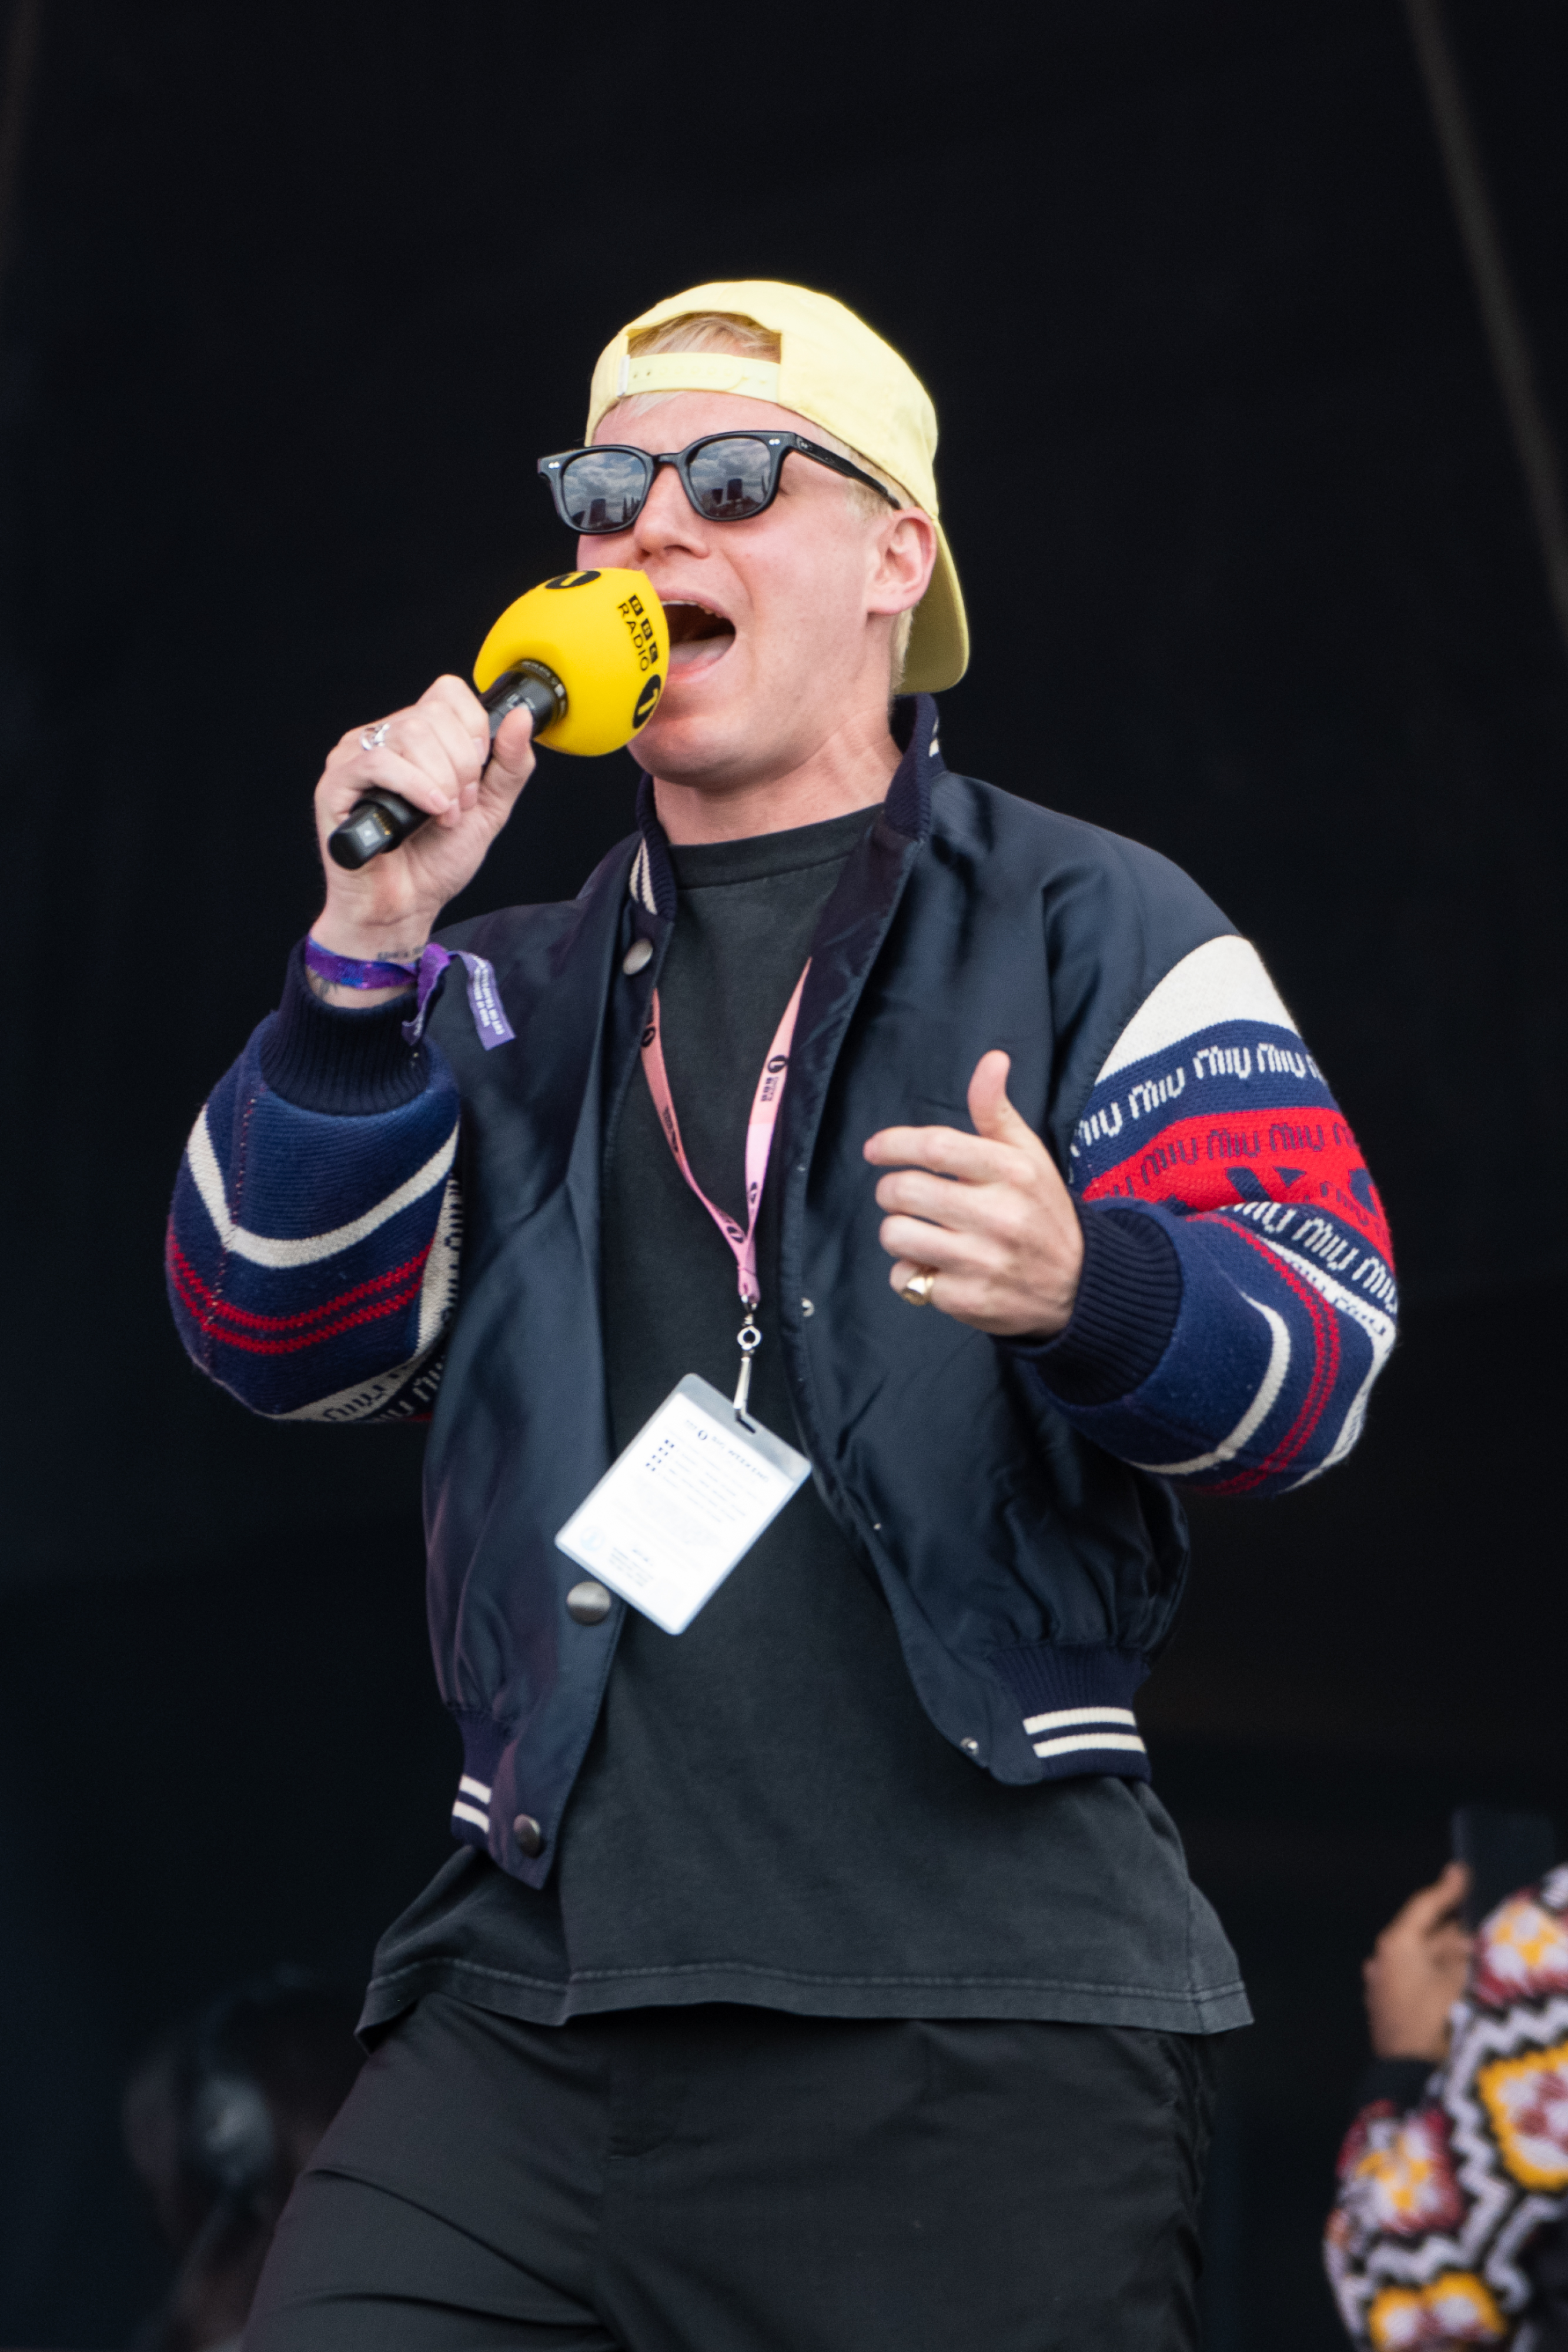 Jamie Laing made the most of his first time at the Radio 1 Big Weekend